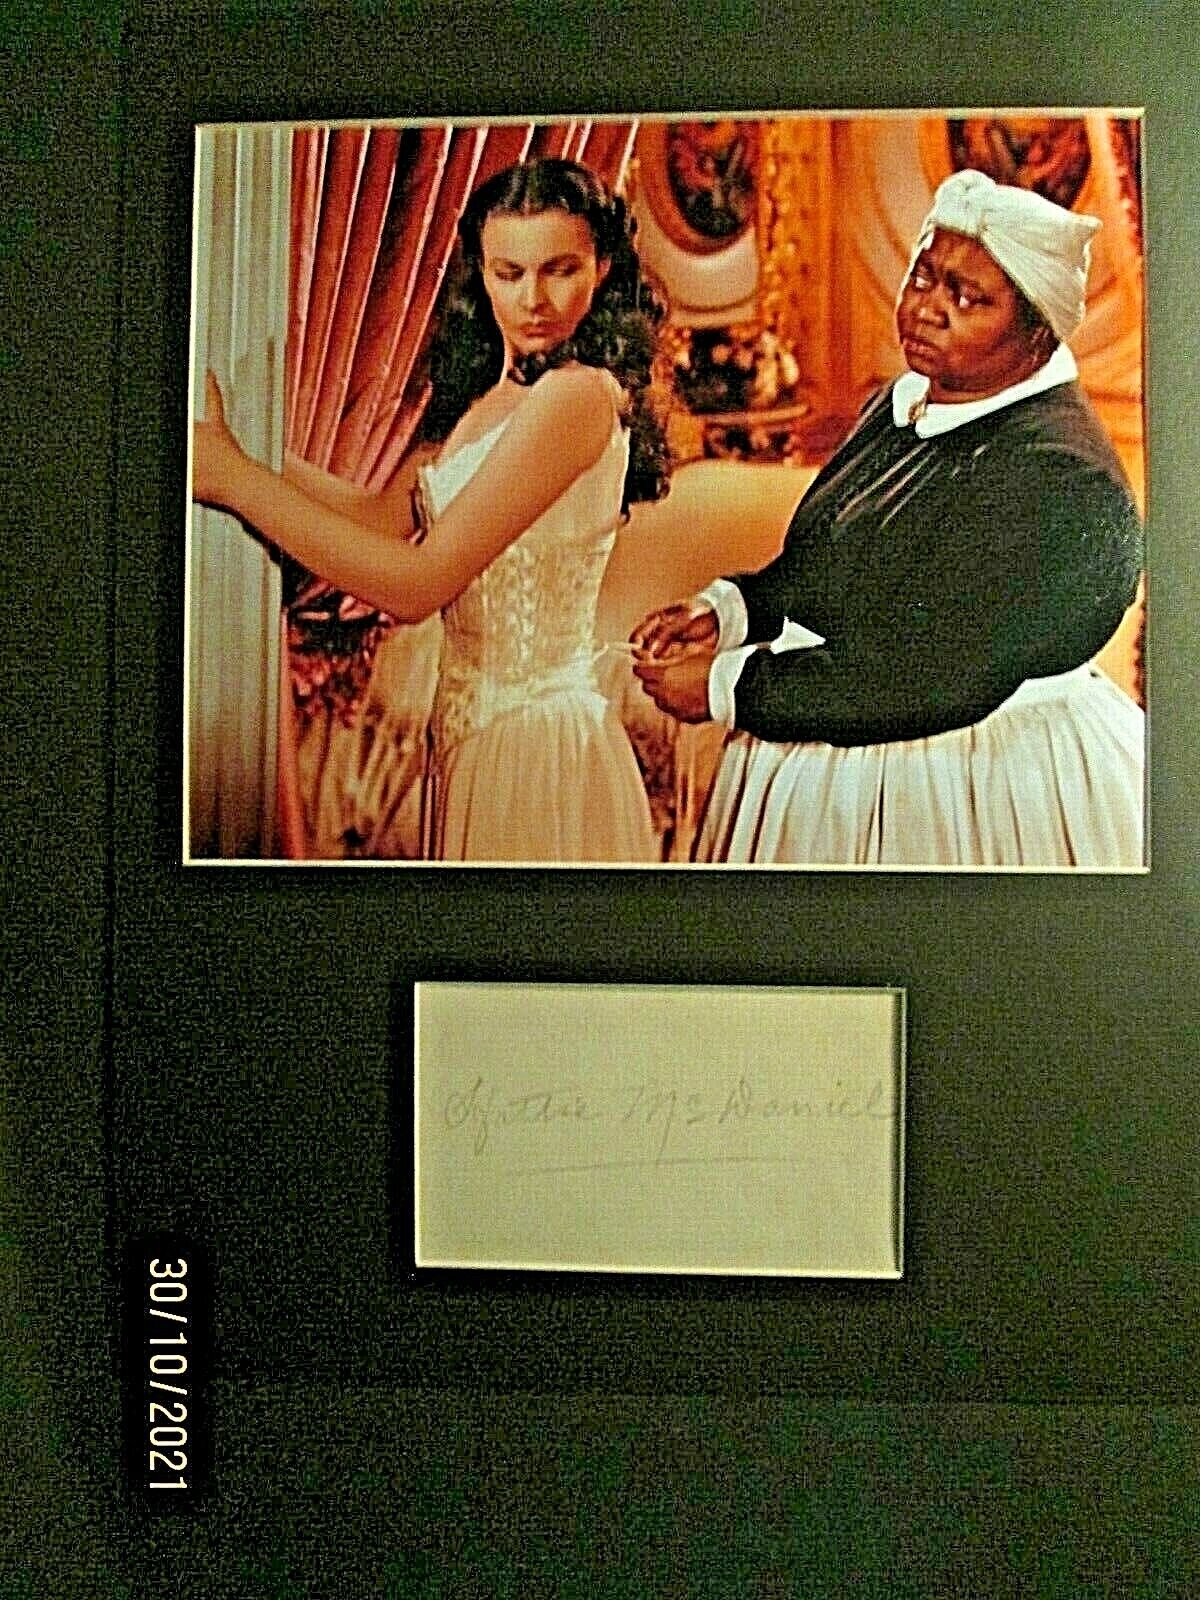 HATTIE McDANIEL: (GONE WITH THE WIND) SIGN AUTOGRAPH CARD & ORIGINAL Photo Poster painting *